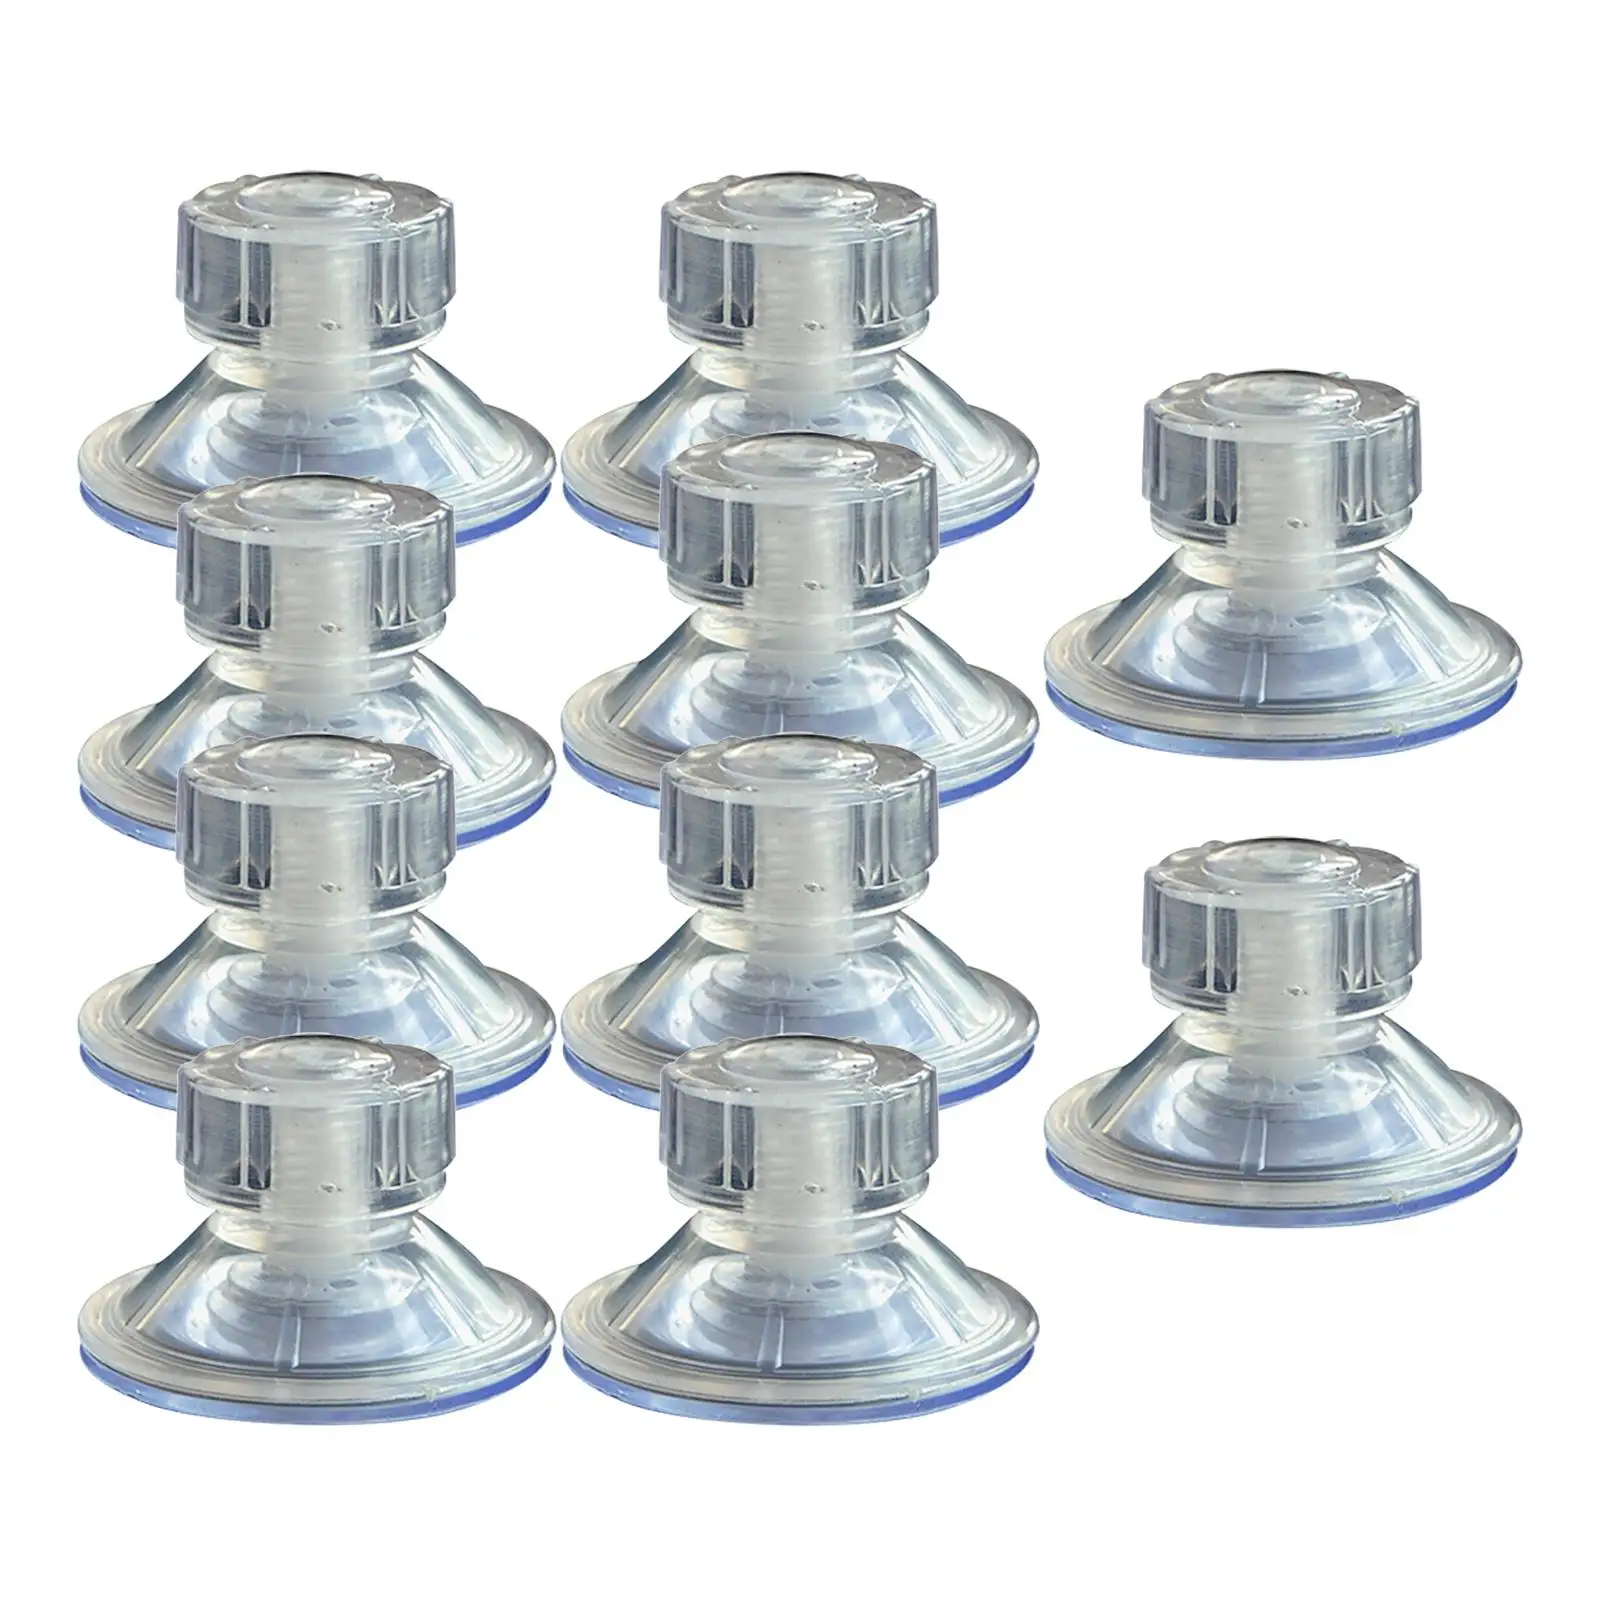 10 Pieces Car Awning Suction Cup Anchor Heavy Duty for Caravan Motorhome